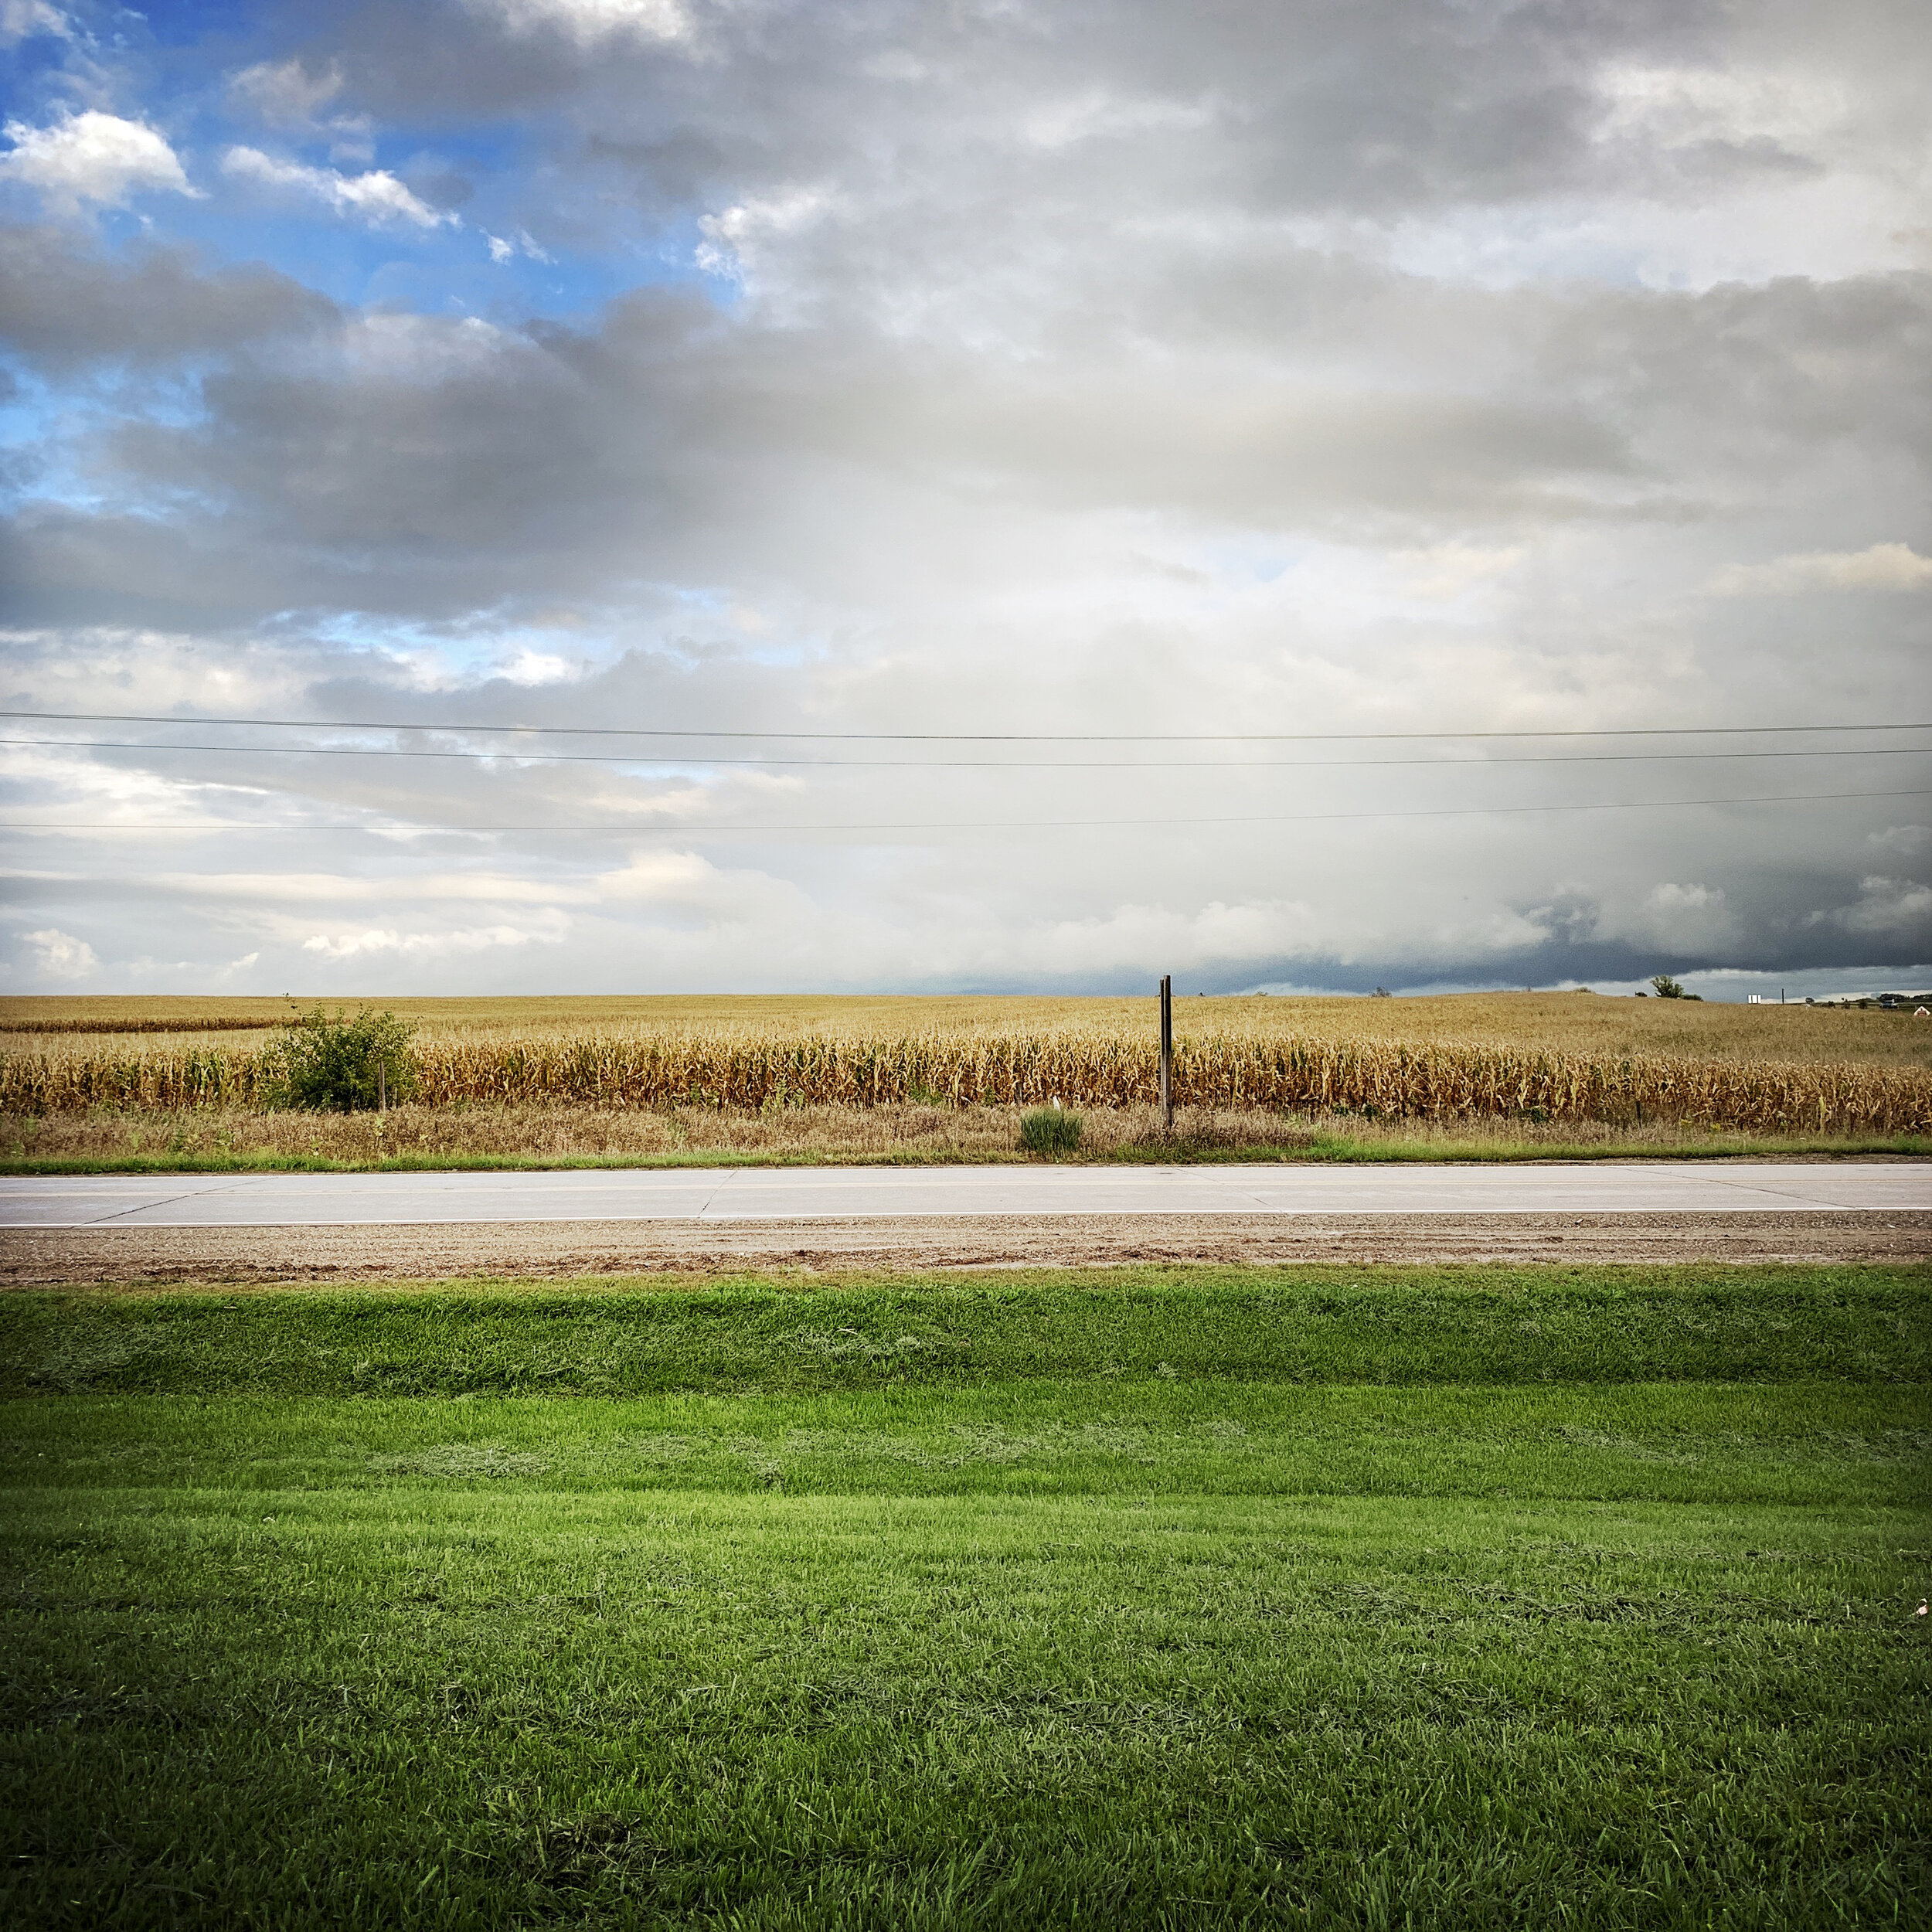 25. On the Road #1, Midwest  2019 color  11_11 in.jpg